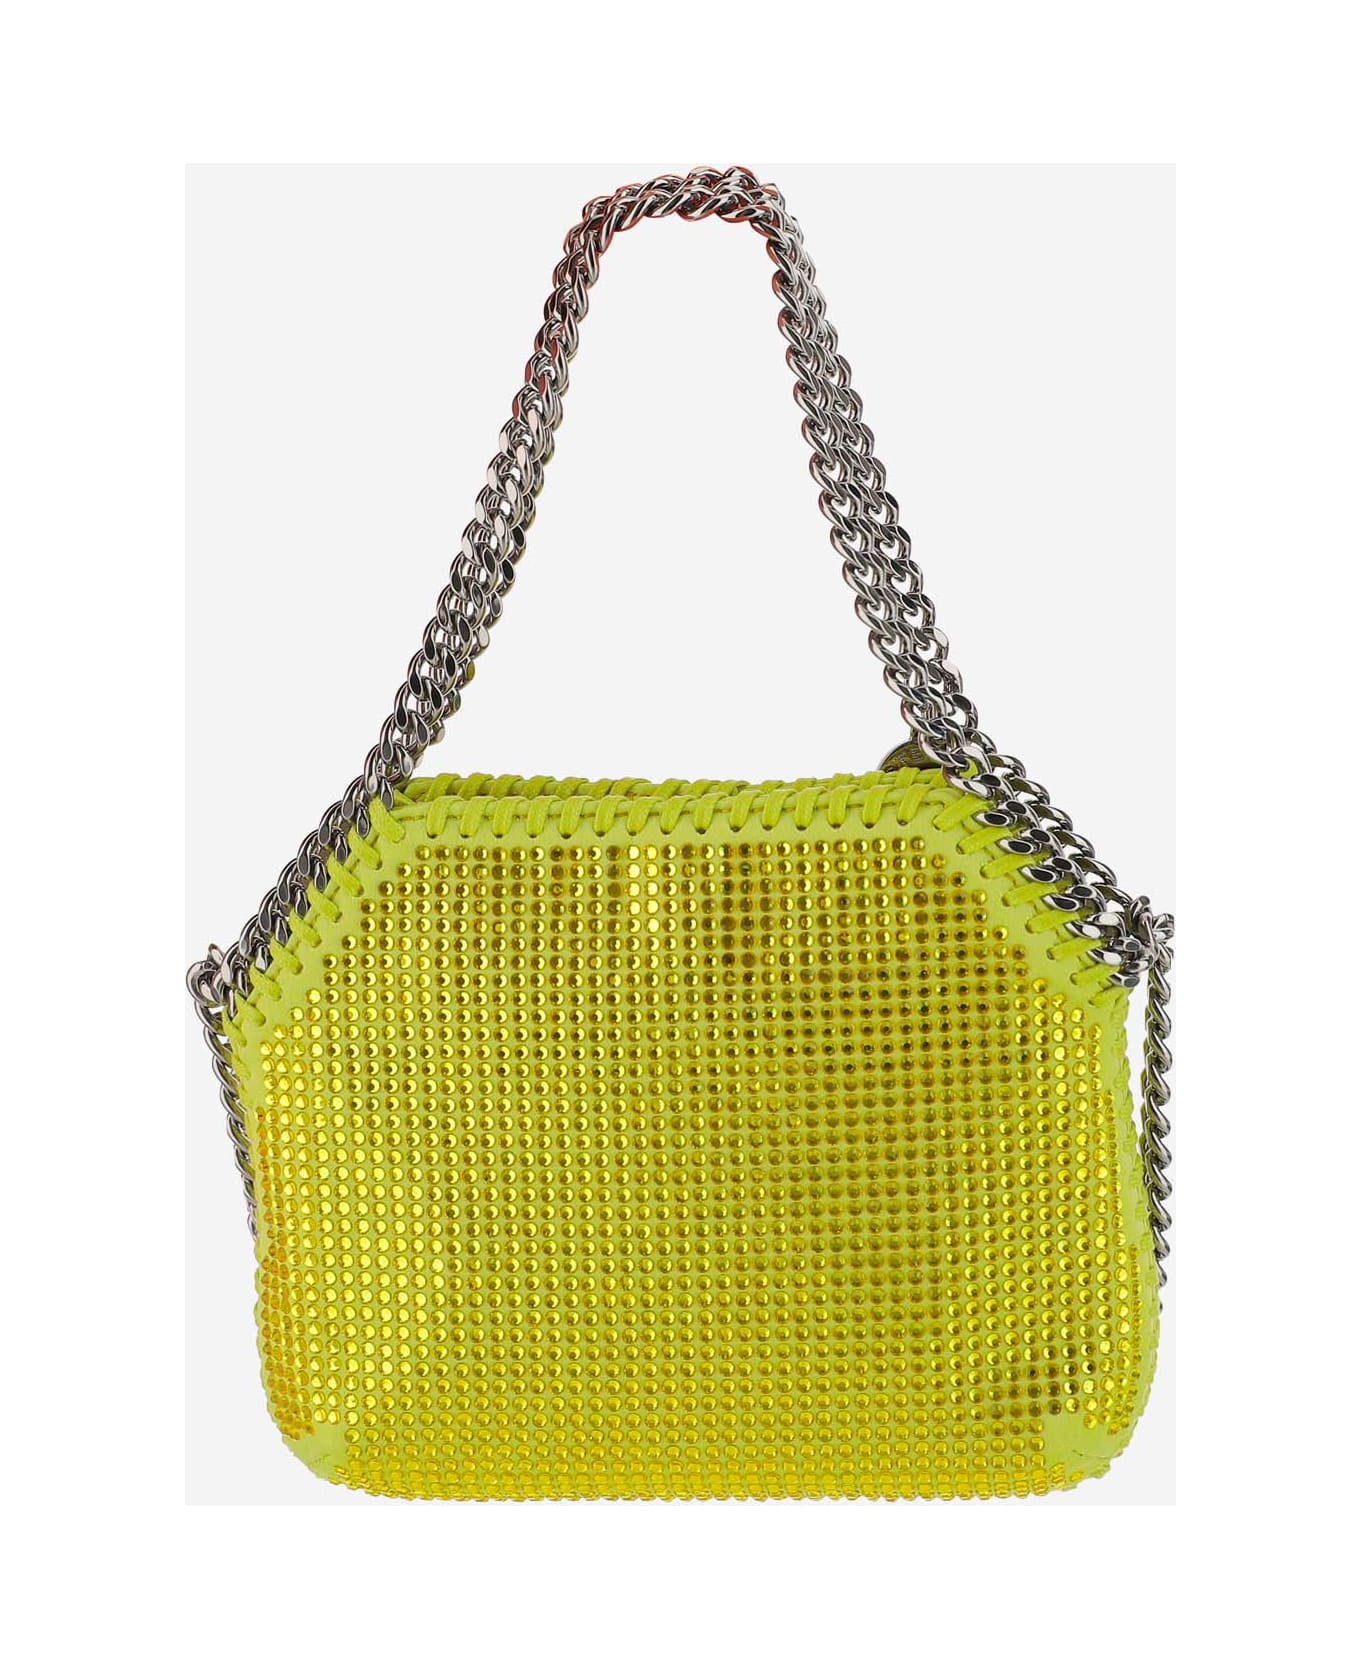 Stella McCartney Mini Shoulder Bag With All-over Crystals - Oxide Yellow トートバッグ